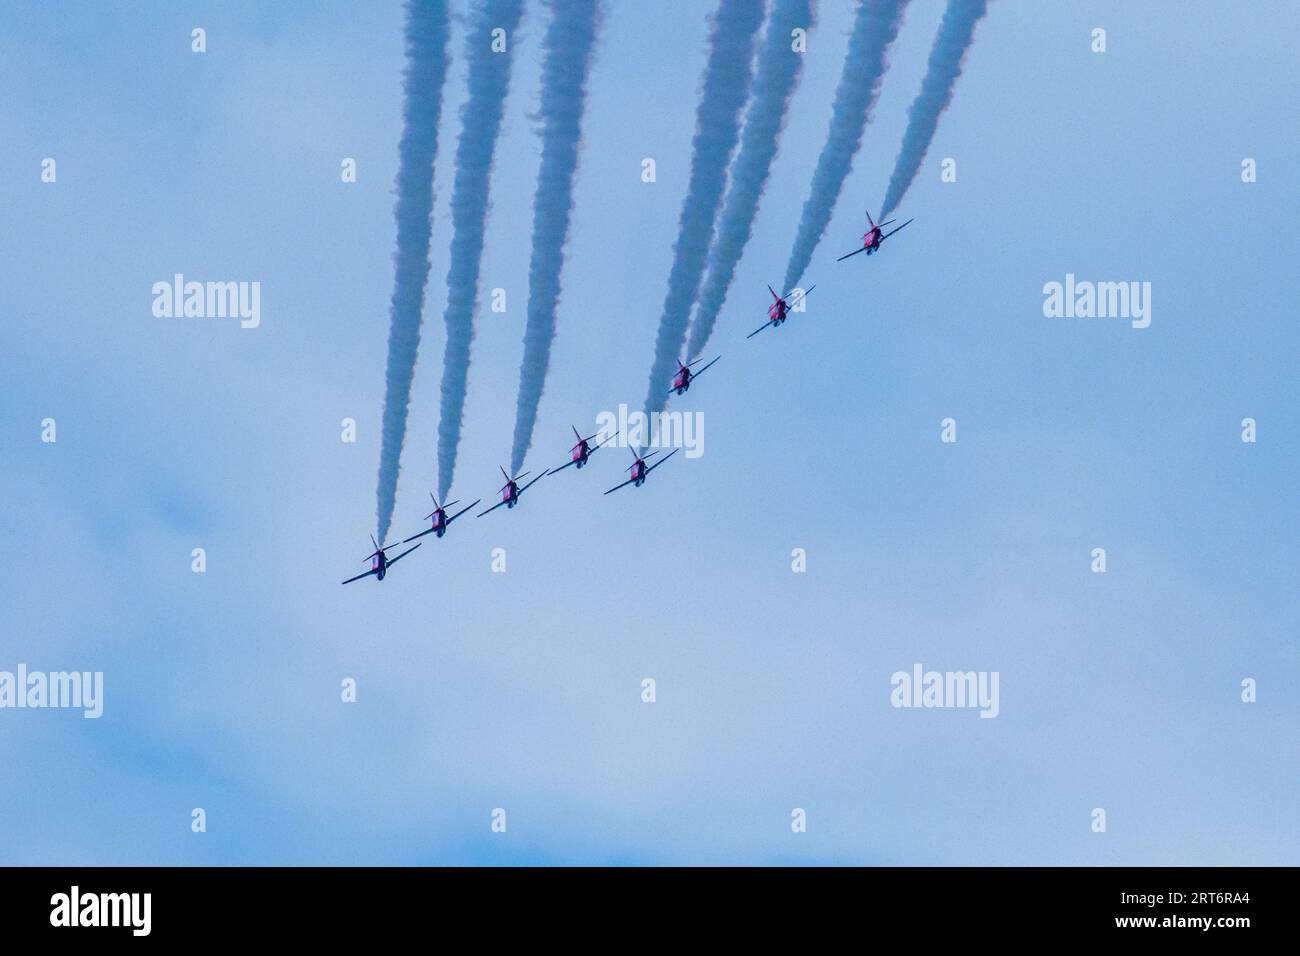 A group of airplanes in perfect formation, flying through the sky with contrails streaming behind them Stock Photo